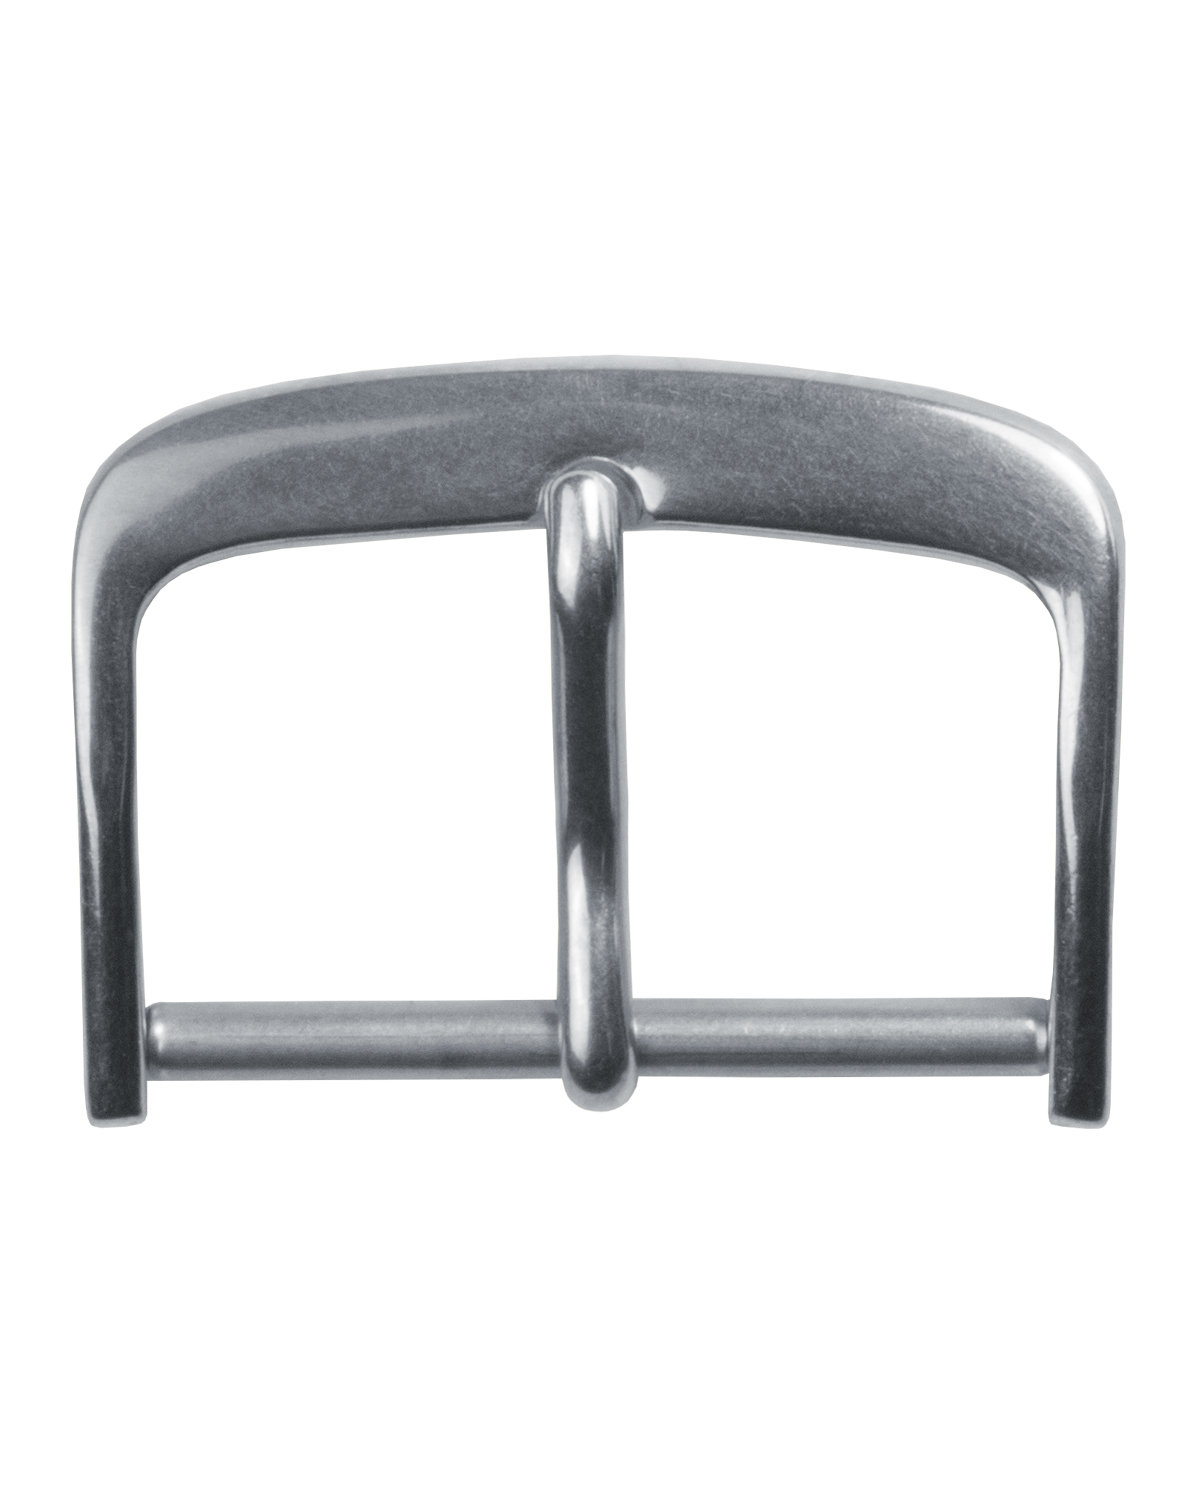 EULIT pin buckle, stainless steel